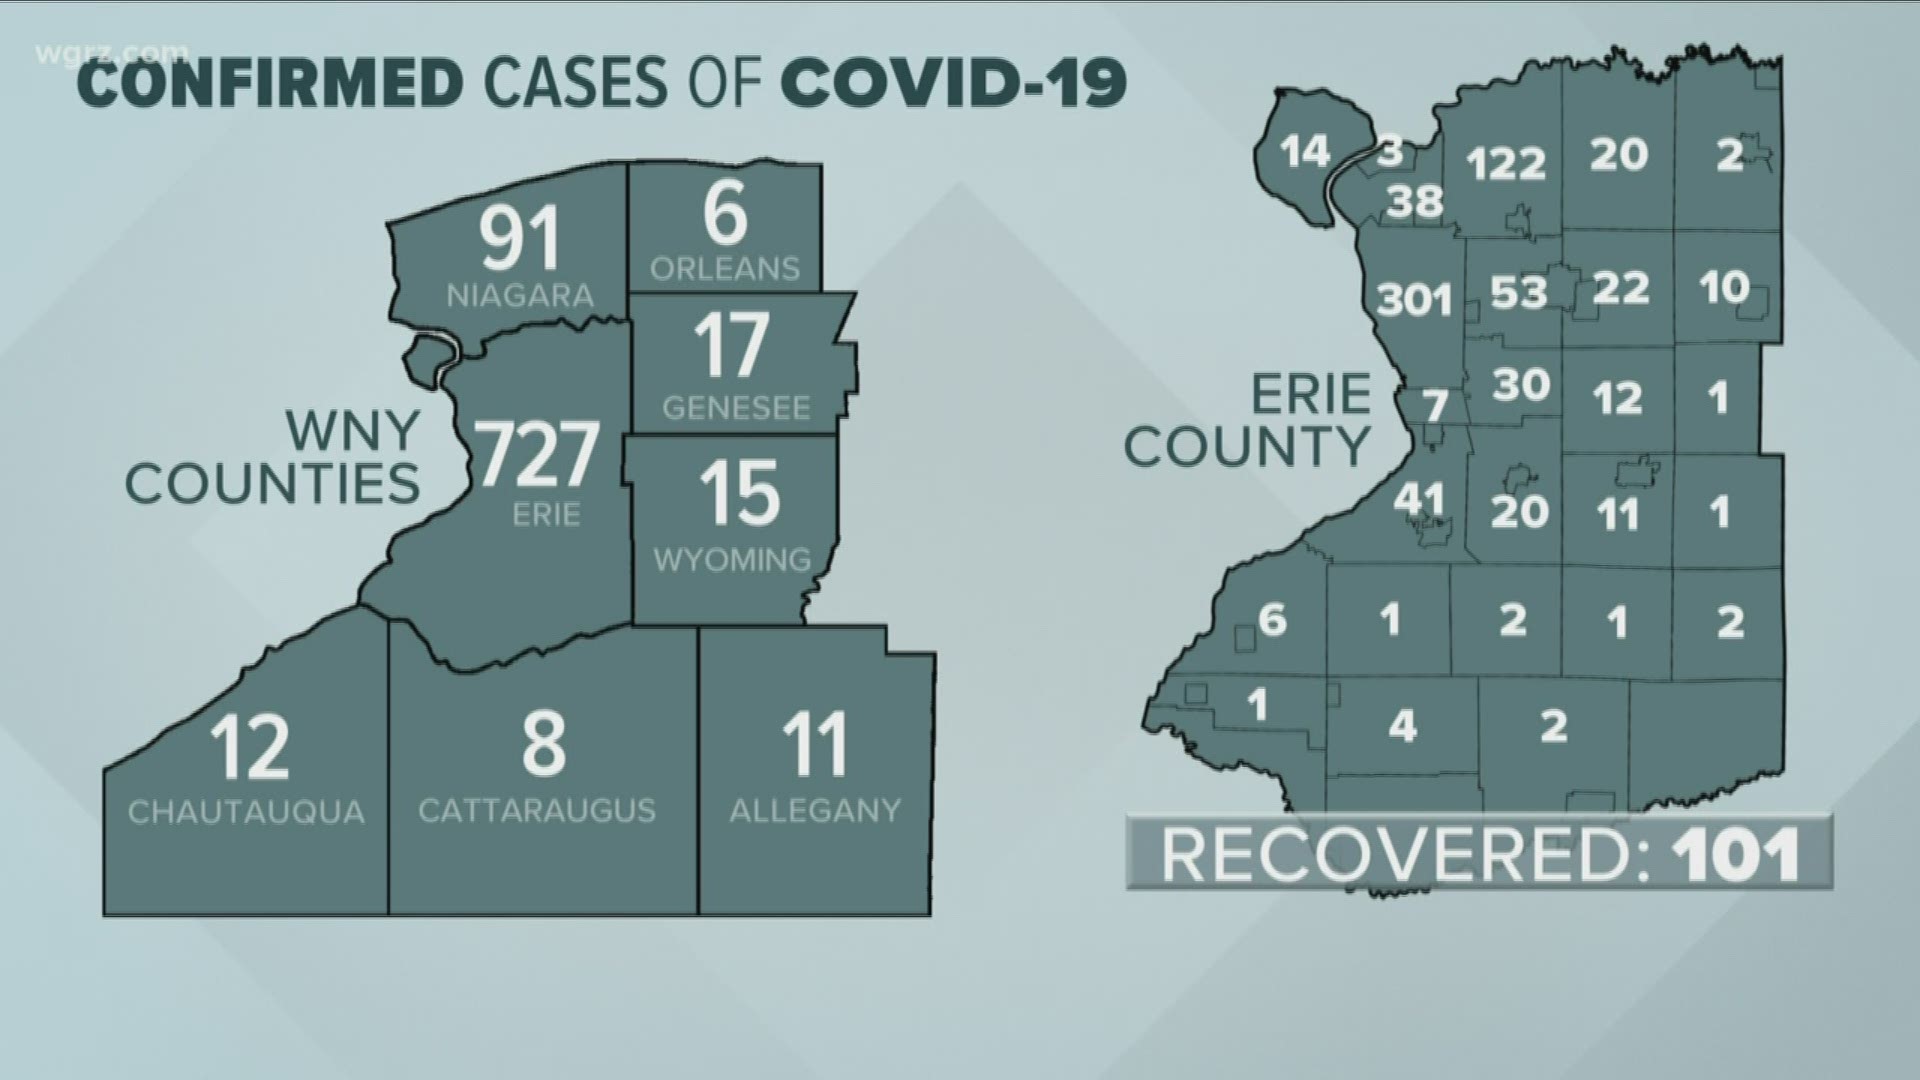 Confirmed Covid-19 cases in NY and WNY